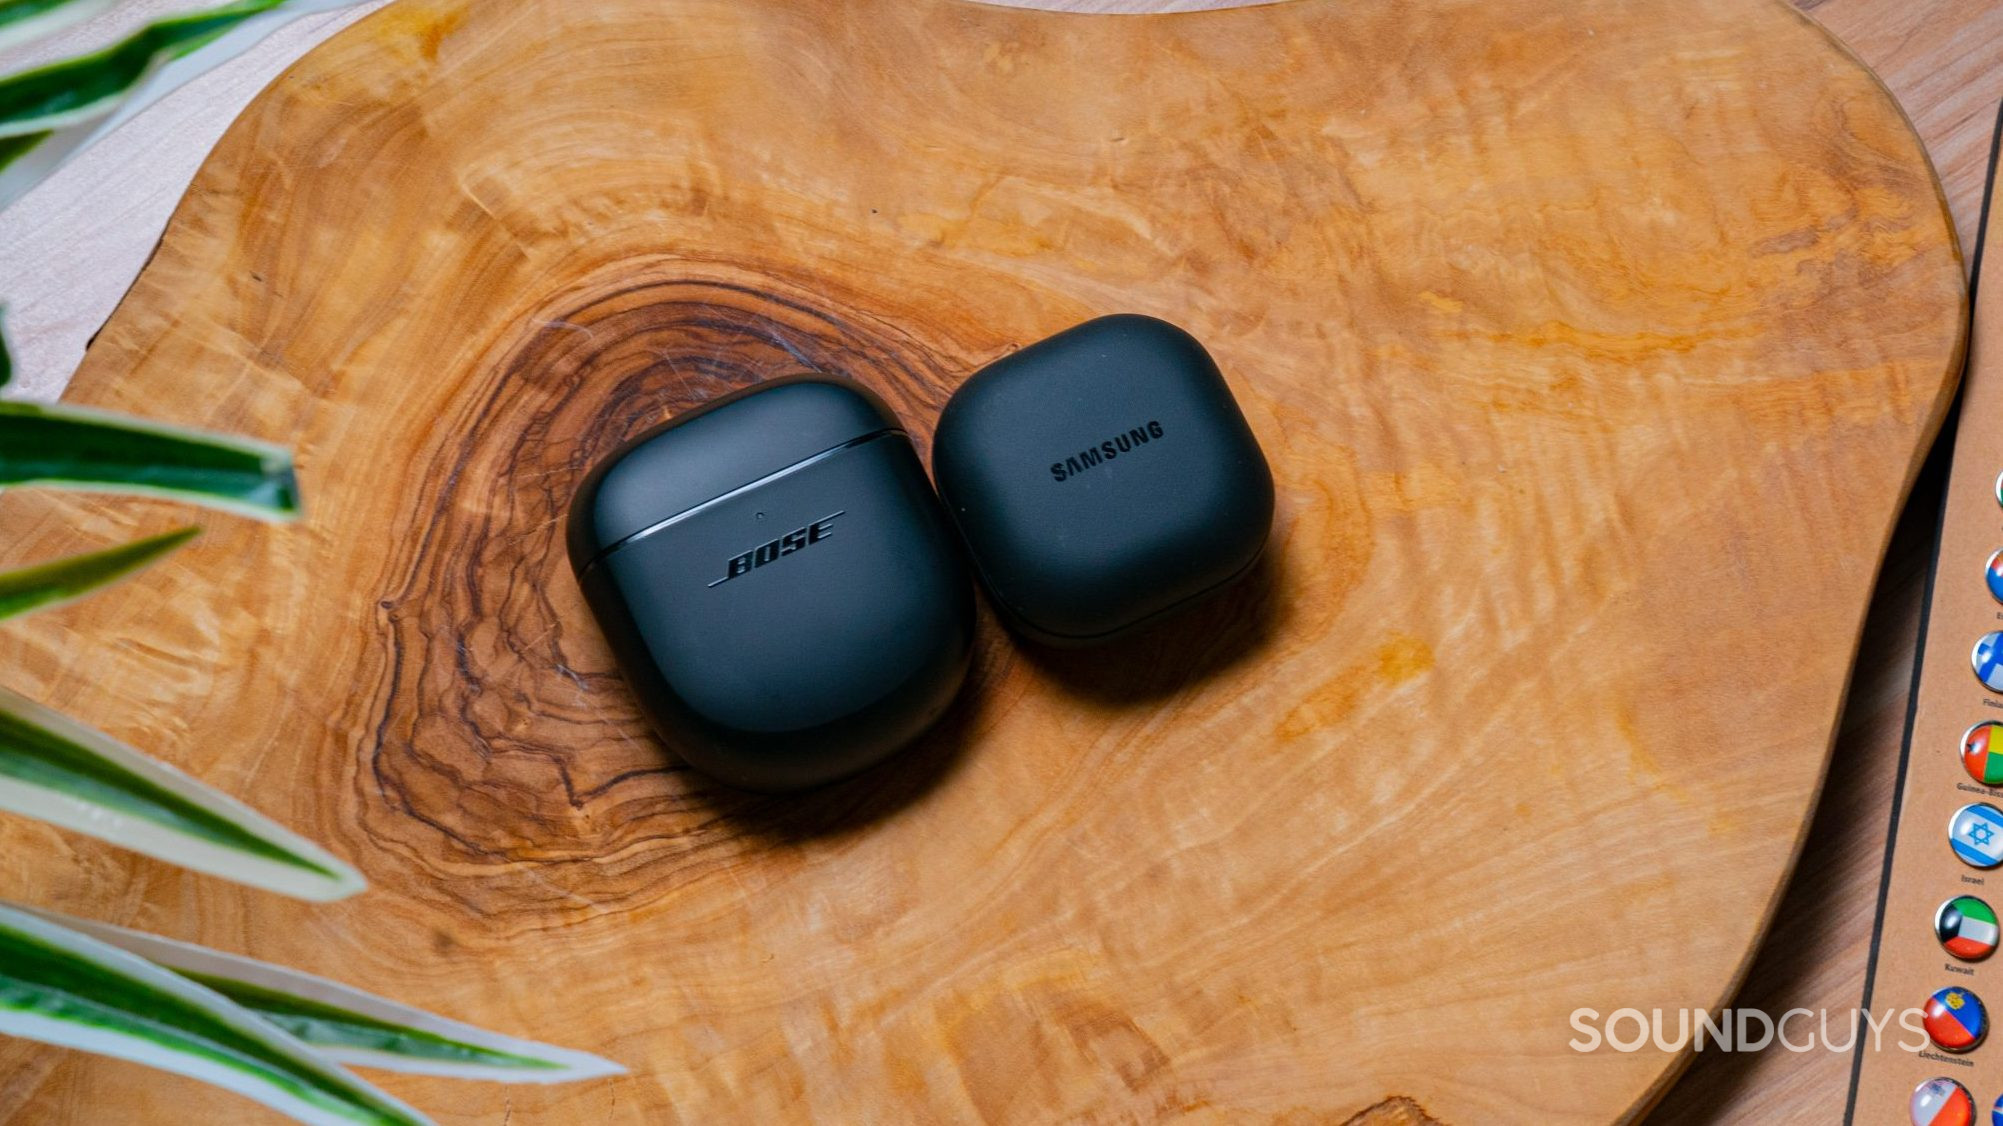 The Bose QuietComfort Earbuds II and Samsung Galaxy Buds 2 Pro cases next to each other on a wooden surface.